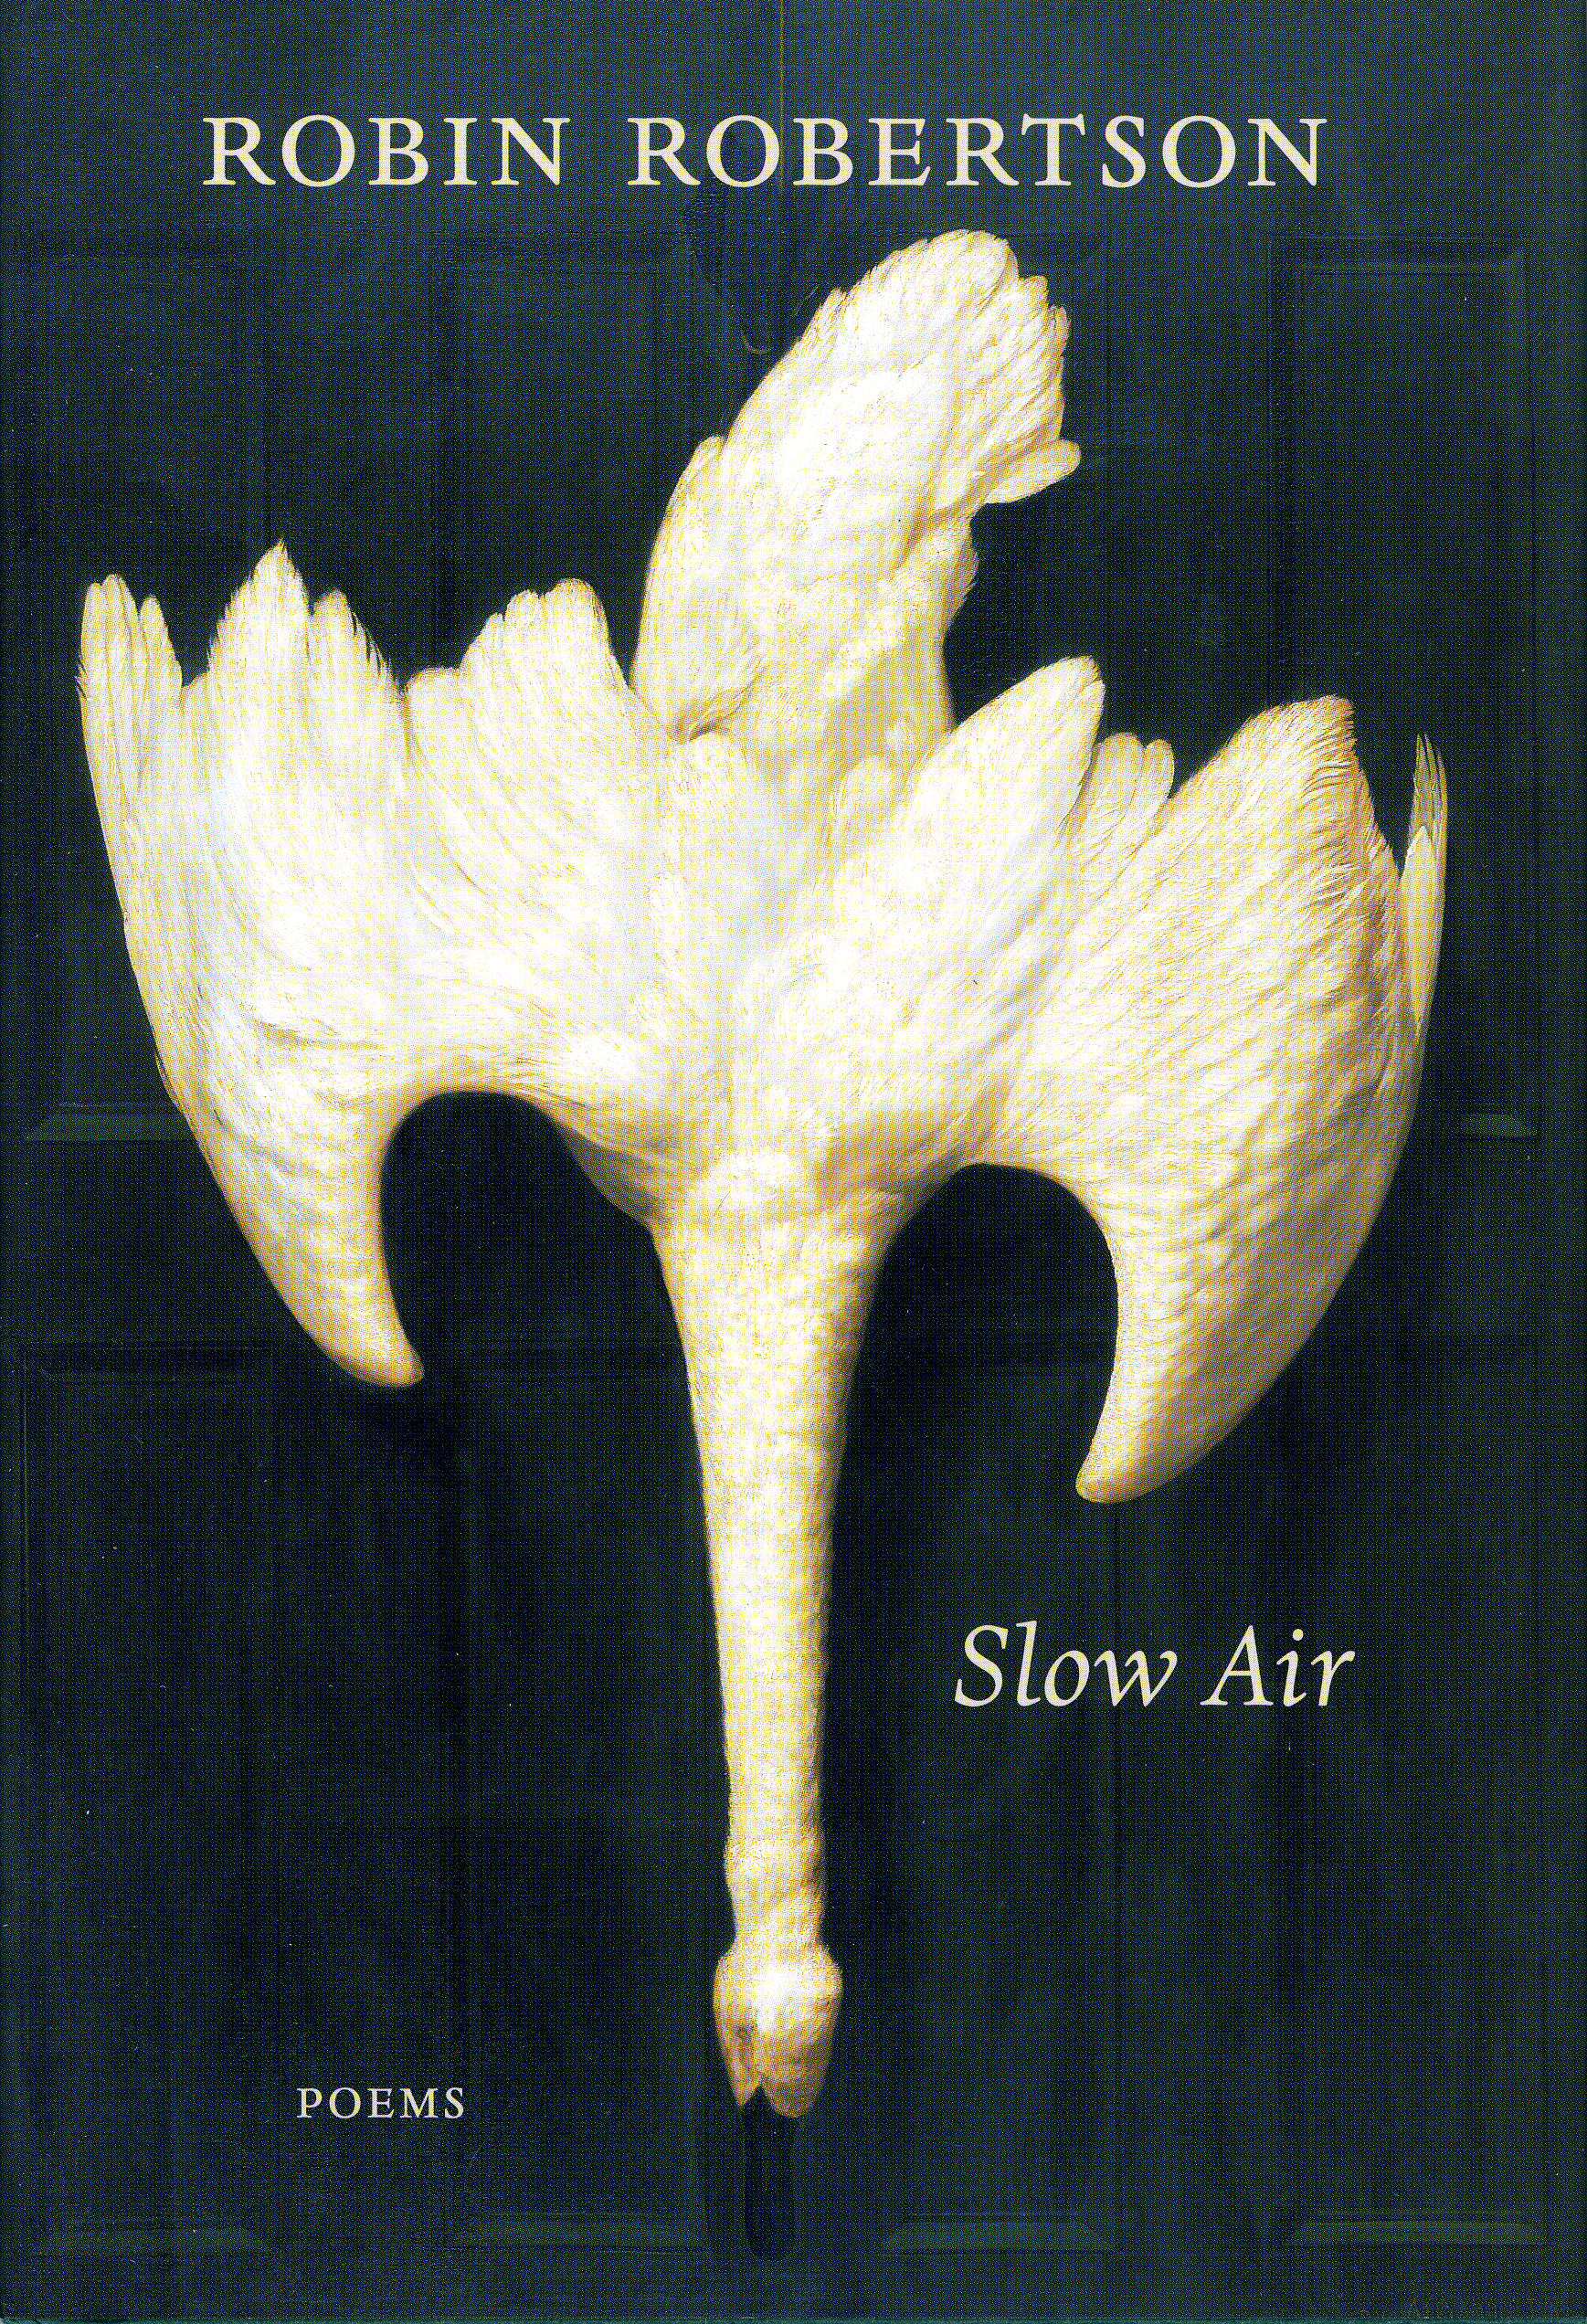 Slow Air by Robin Robertson